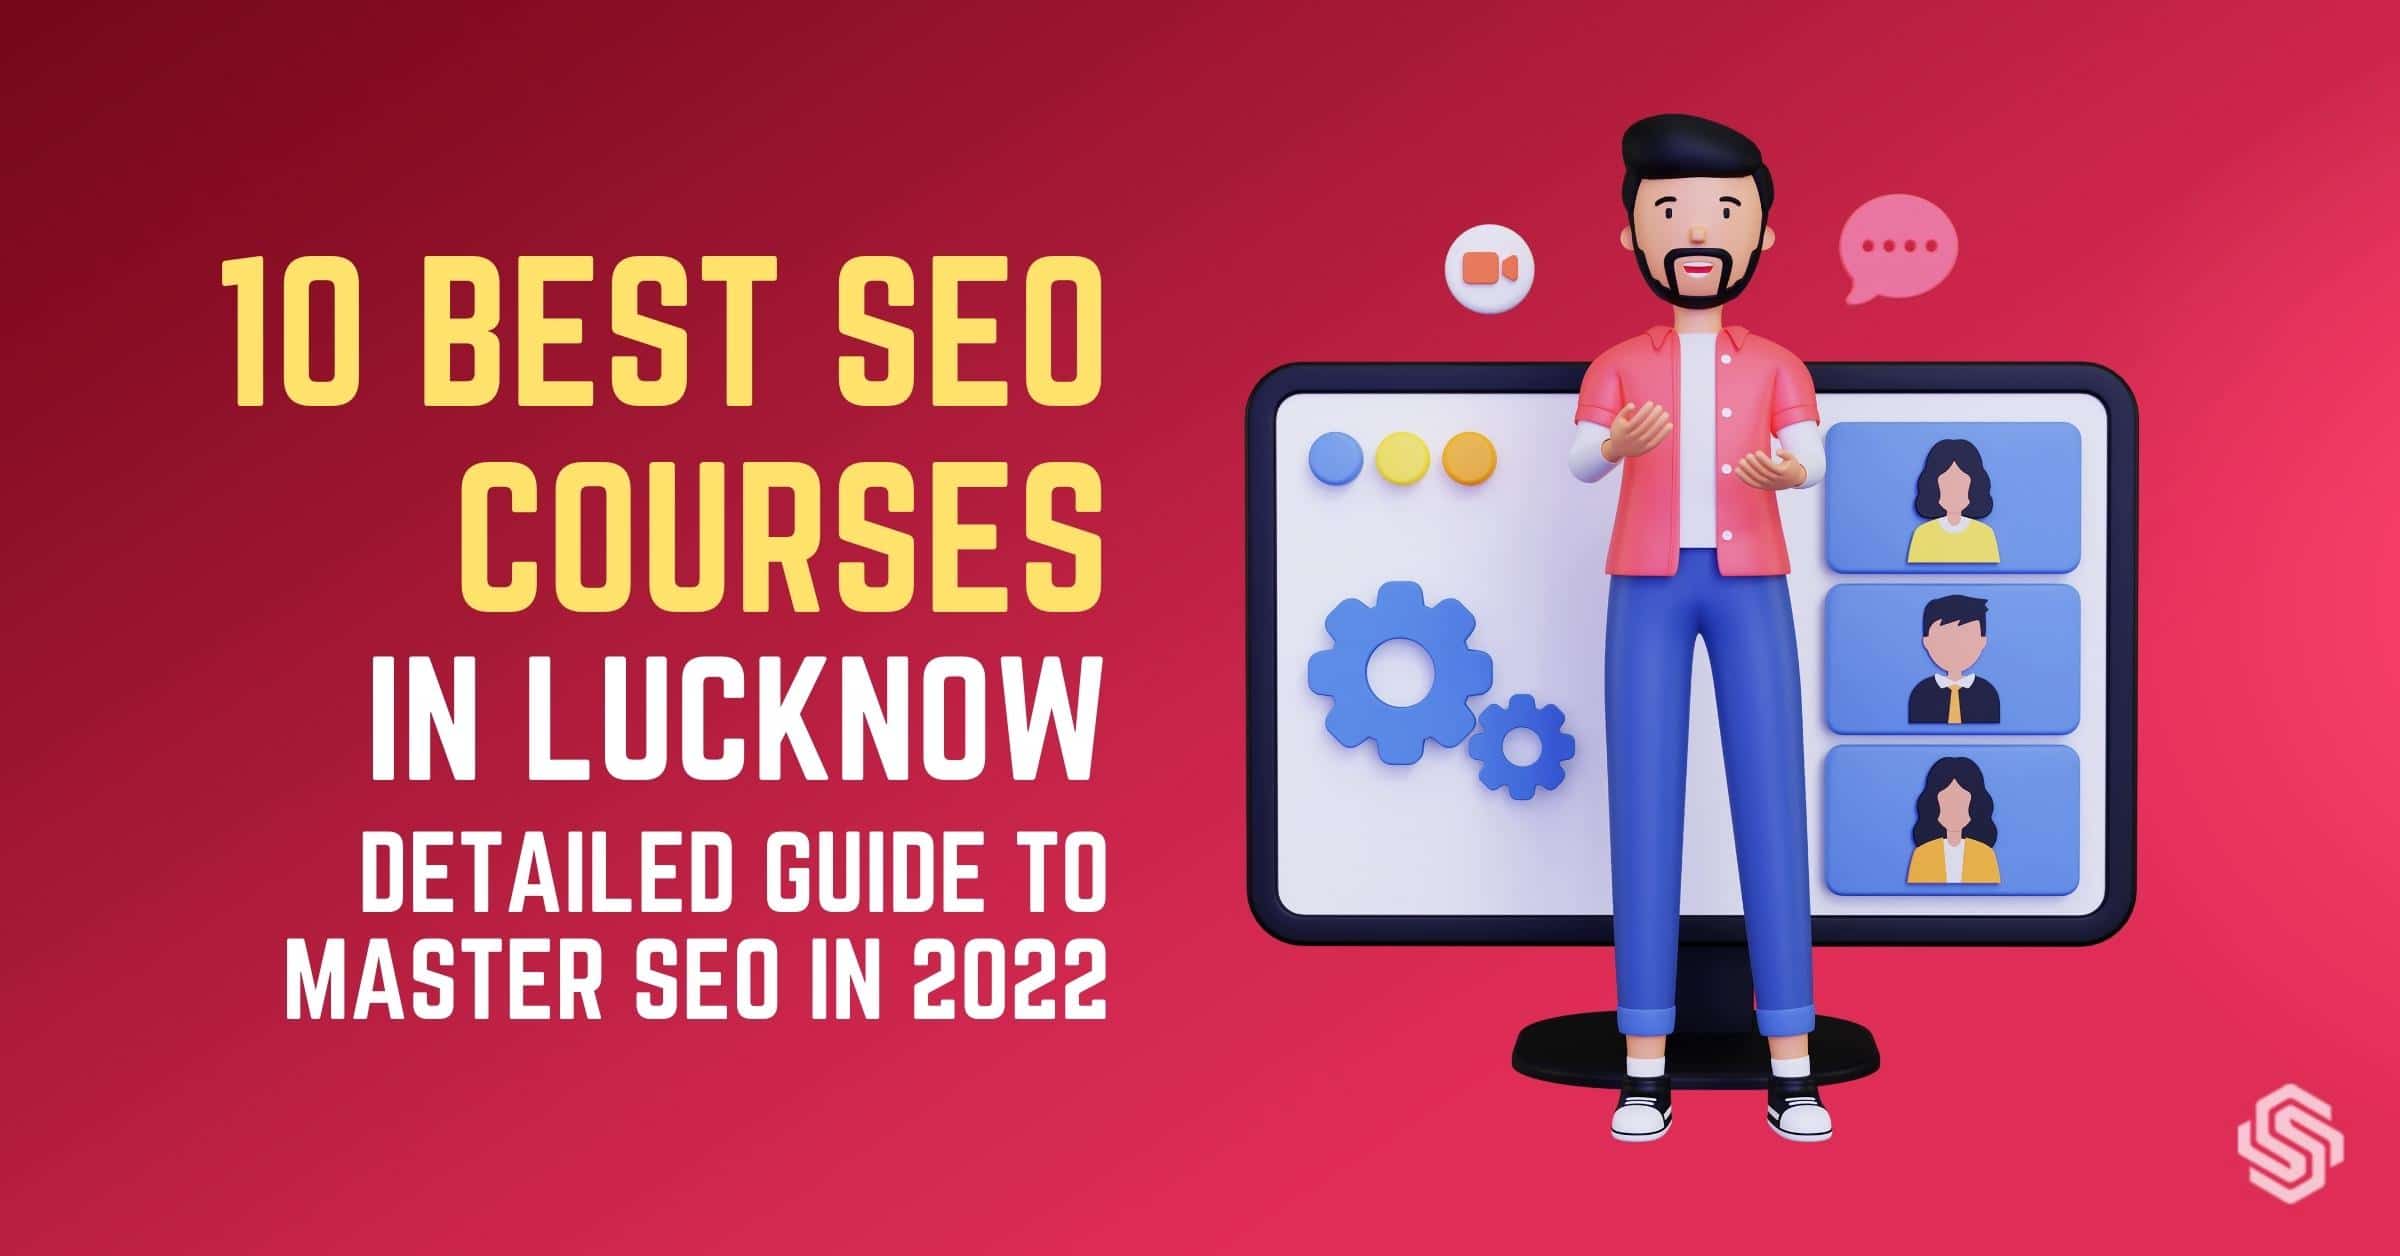 SEO Courses in Lucknow